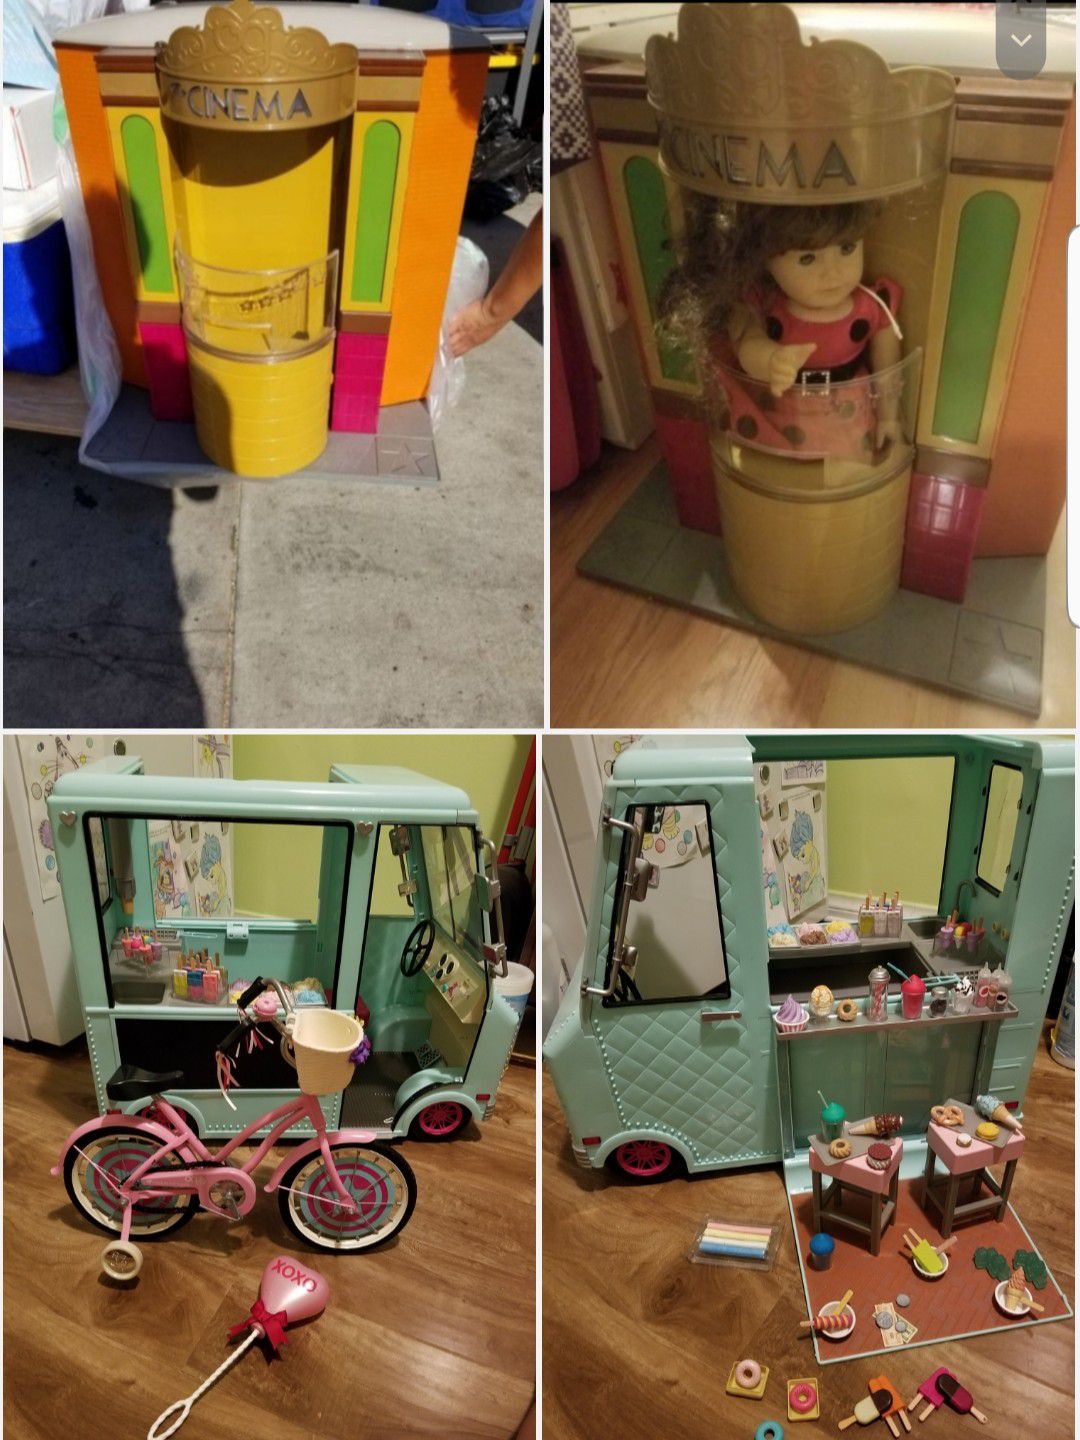 OG CINEMA and ICE CREAM truck selling it as a bundle..all you see for $90 dollars...see description and map for pick up area👇FIRM ON PRICE